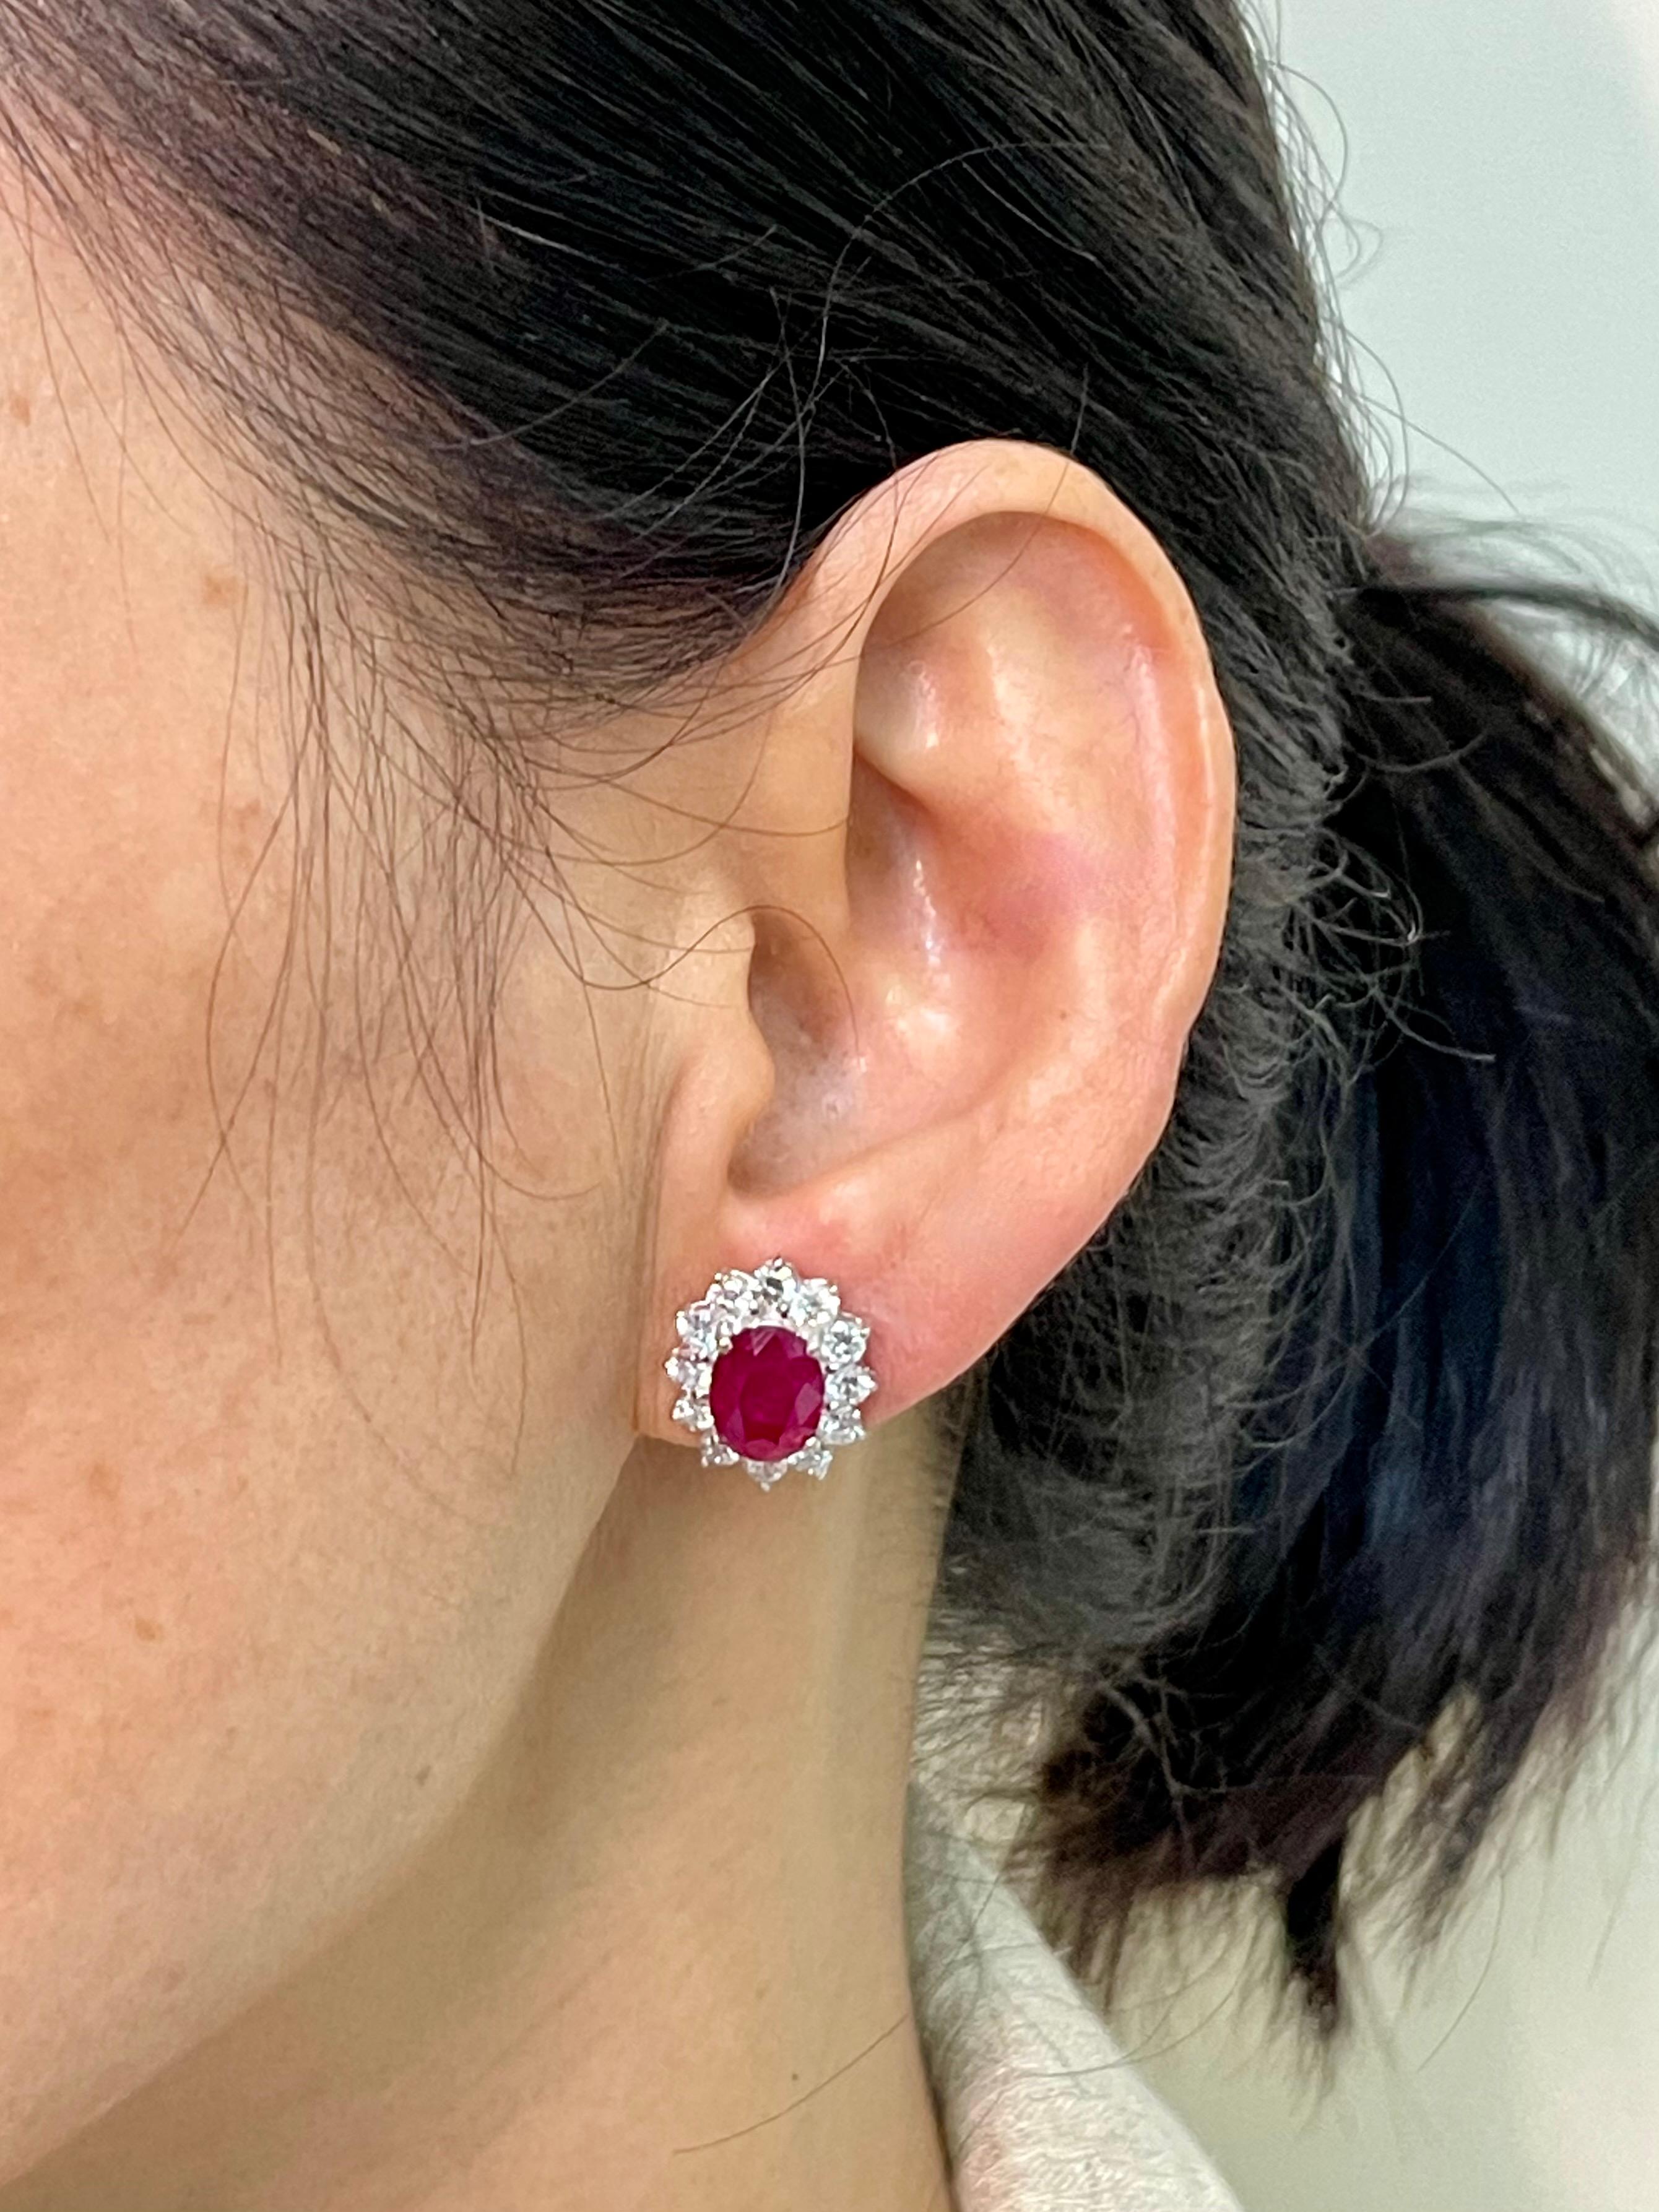 Please check out the HD video. These earrings GLOW! Here is a fantastic vivid red Ruby diamond stud earrings. This pair of ruby diamond stud earrings are absolutely beautiful and simple. The earrings are set in 18k white gold. It contains an